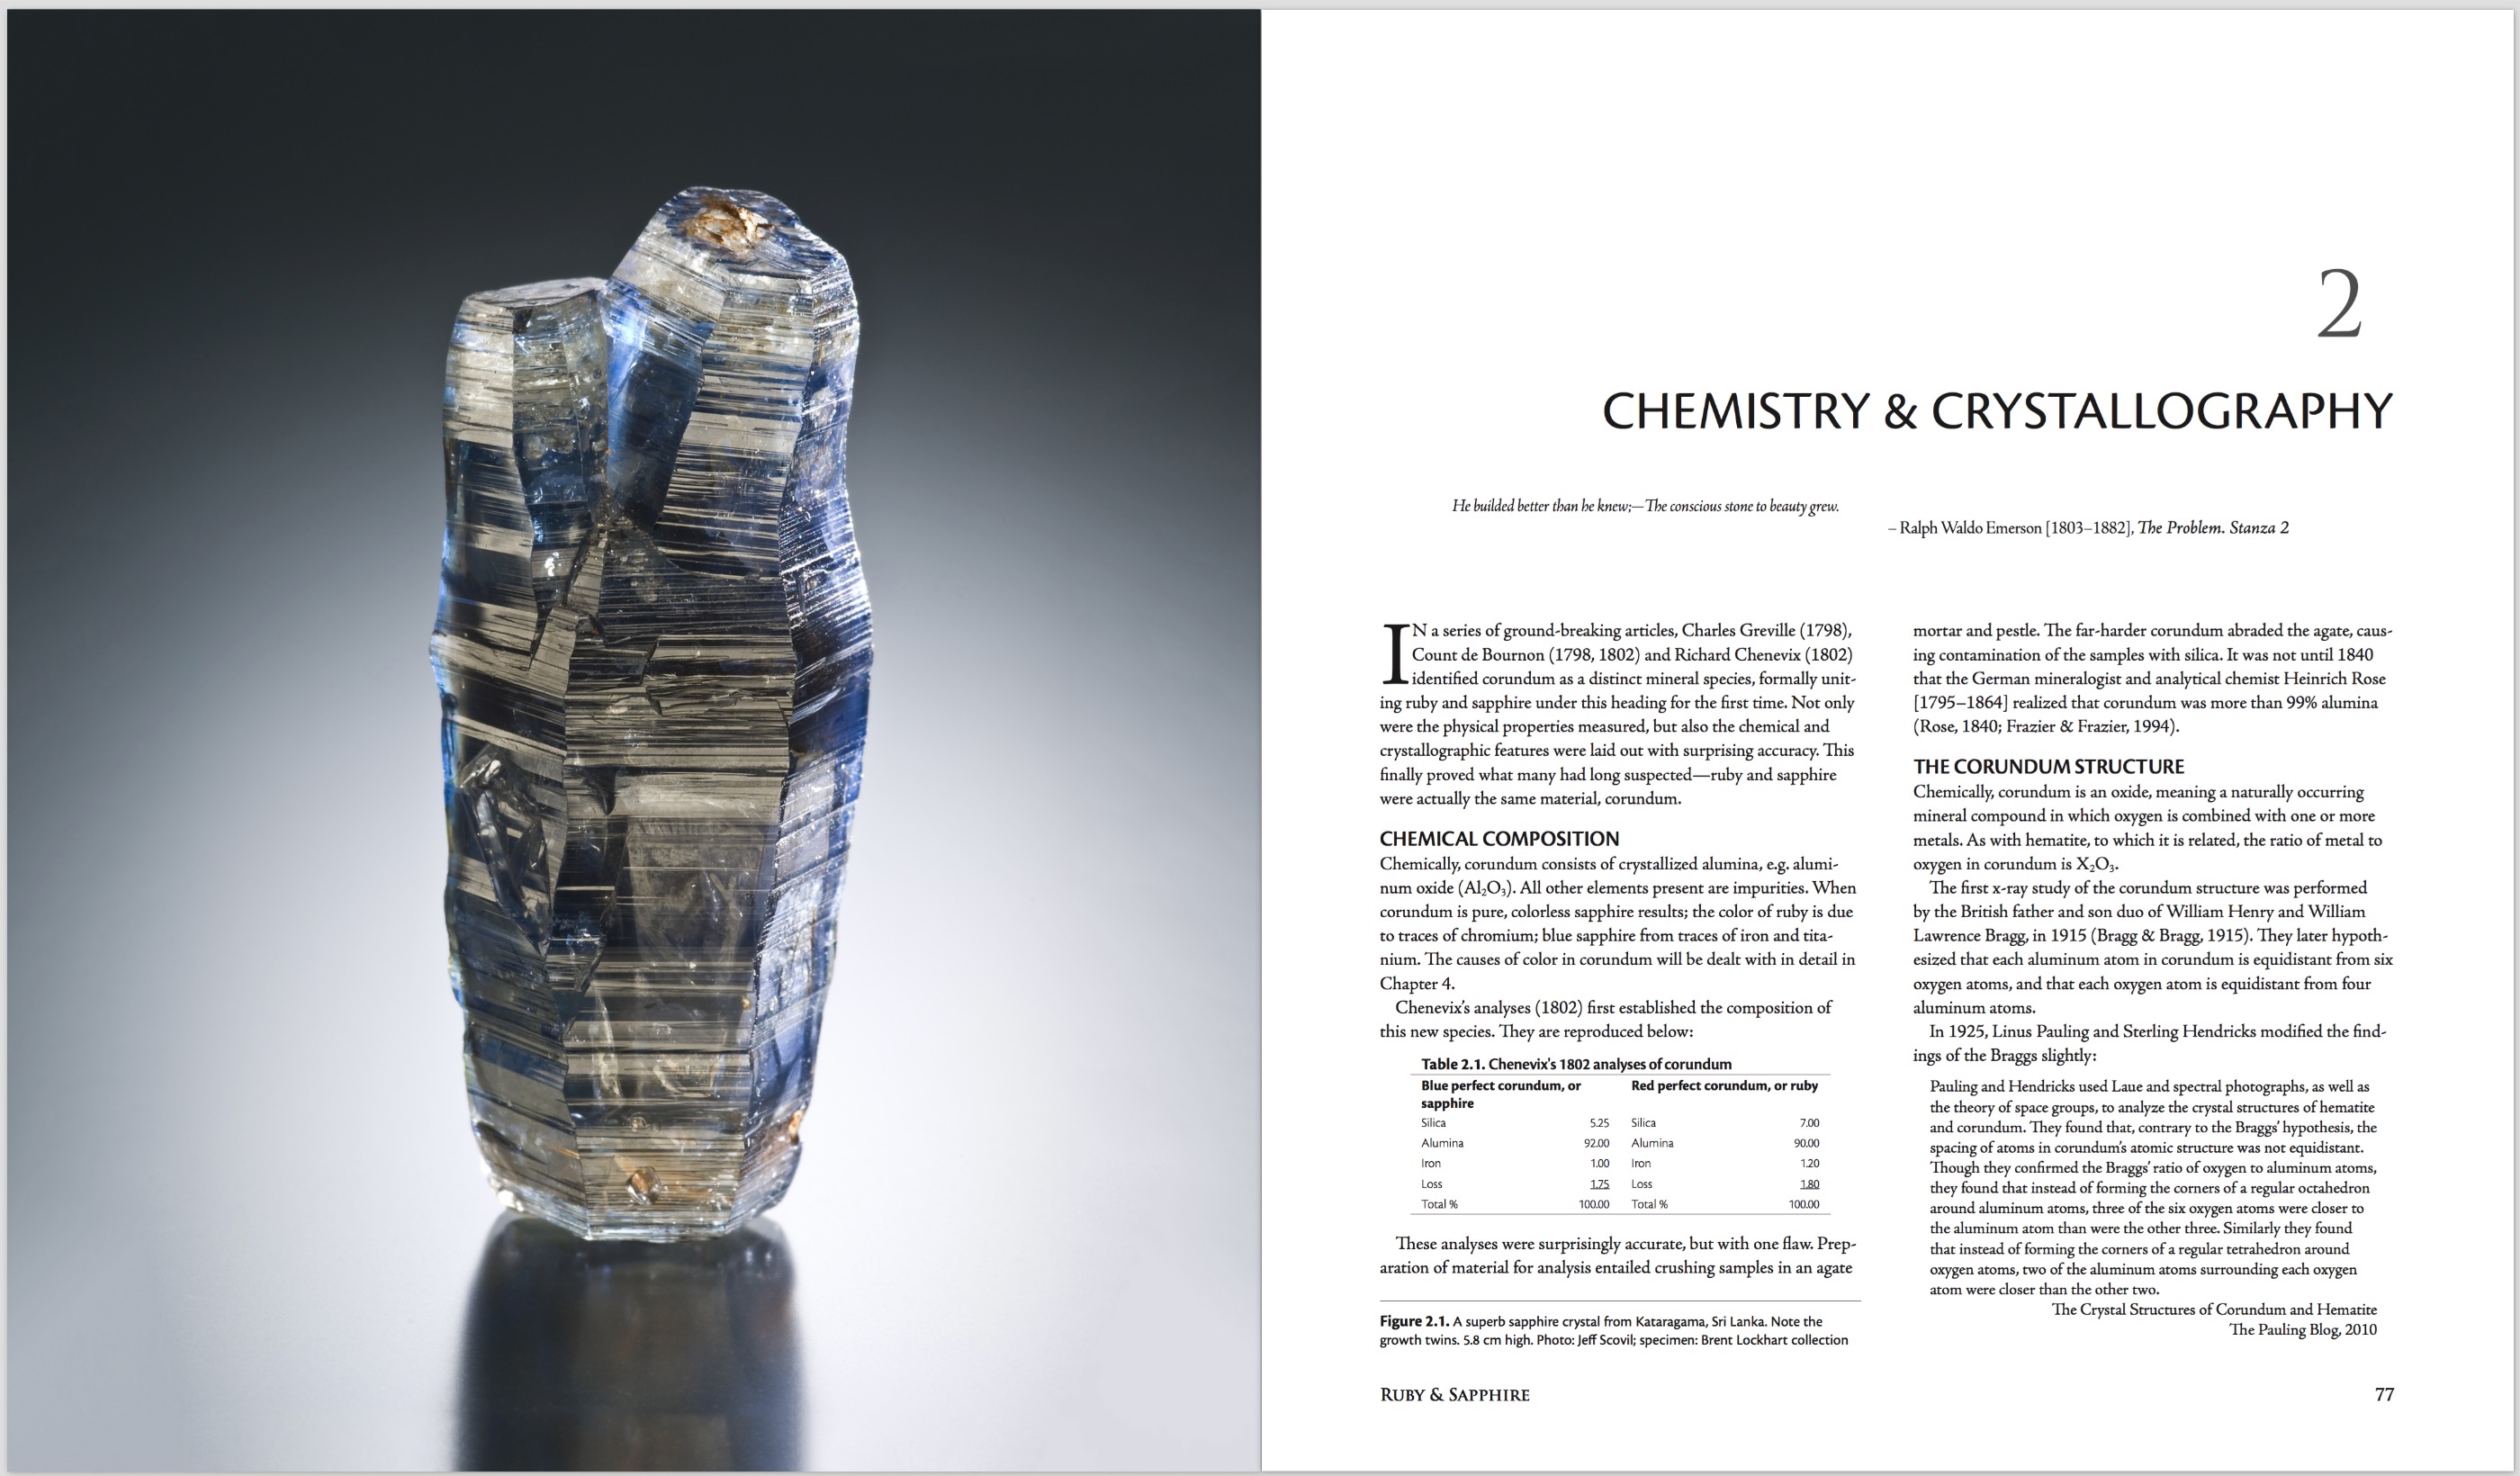 Ruby & Sapphire: A Gemologist's Guide – Chemistry & Crystallography